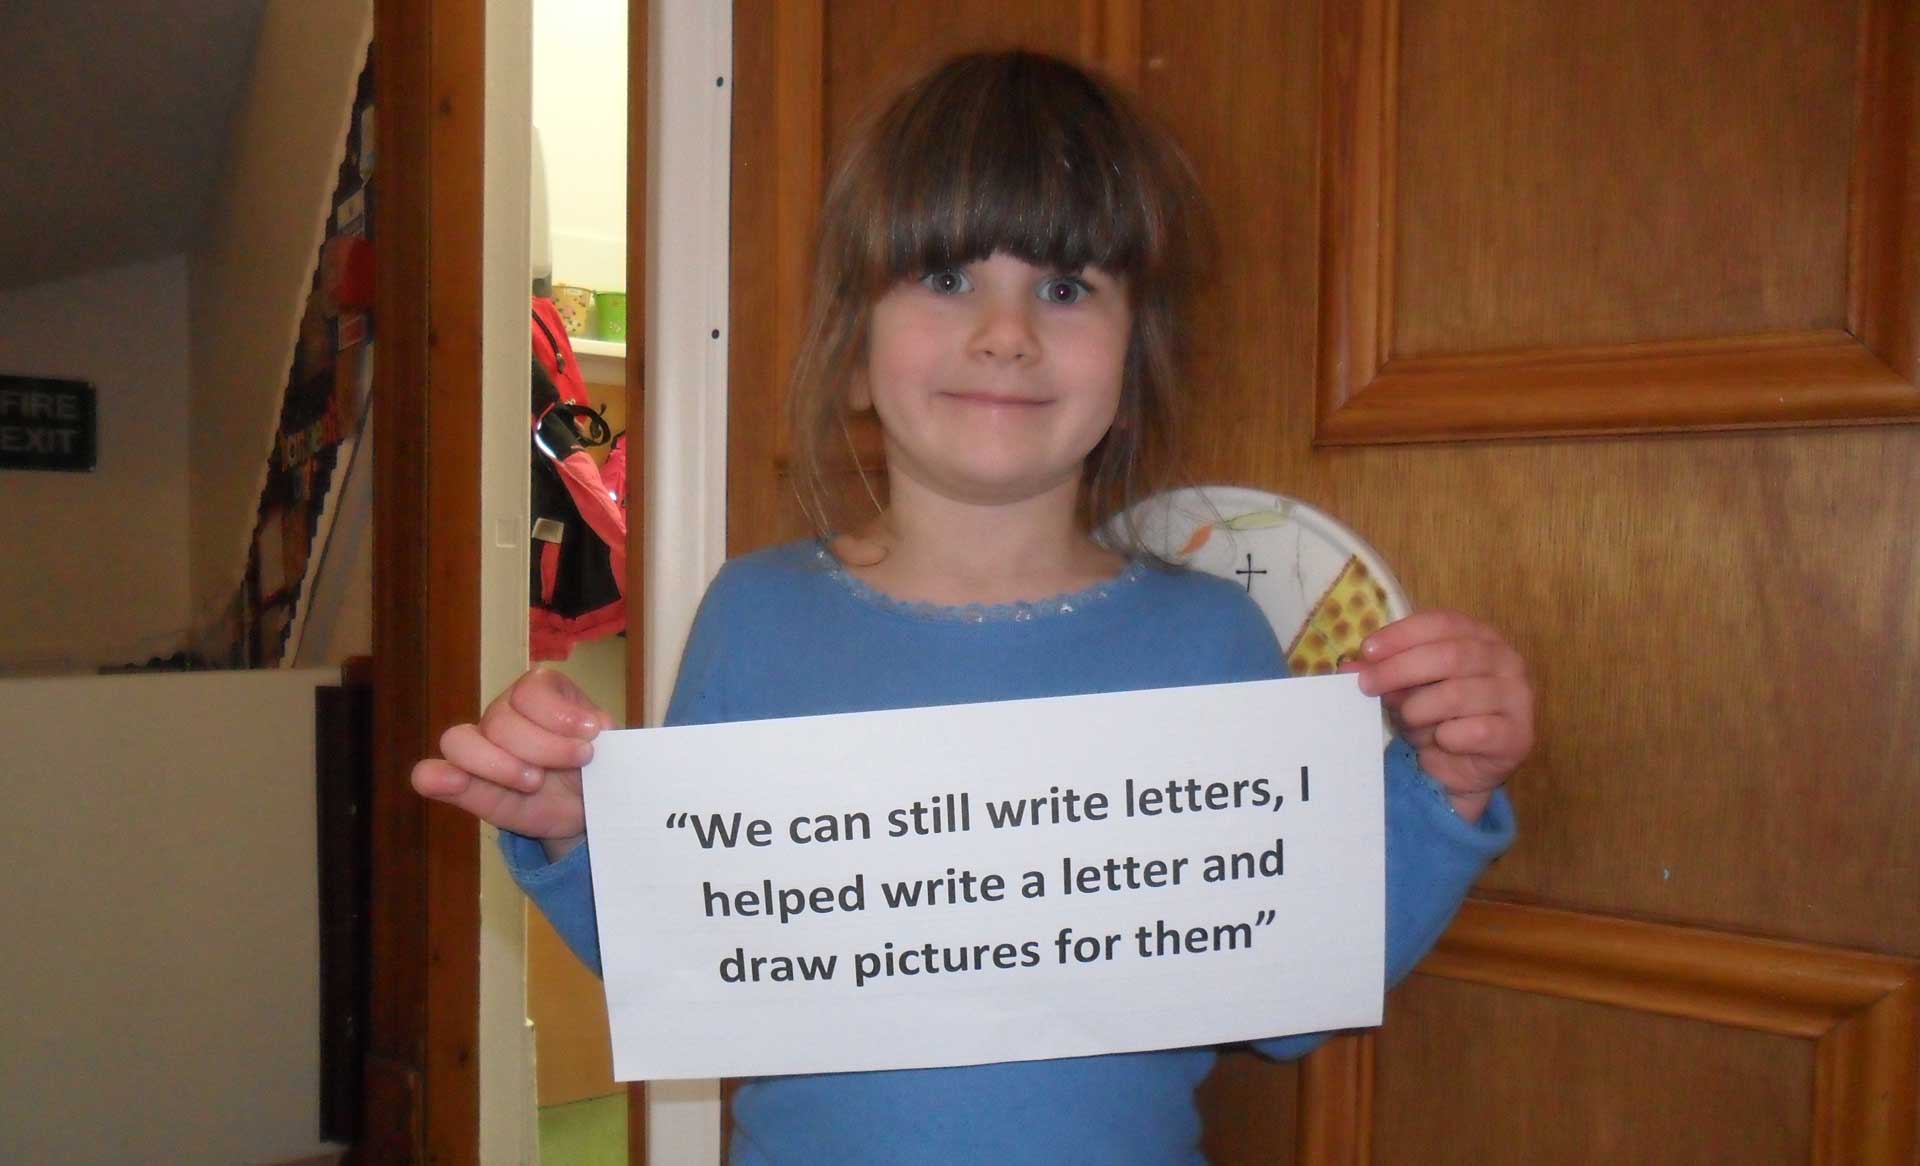 A preschool child holds up a typed note that says "We can still write letters, I helped write a letter and draw pictures for them".